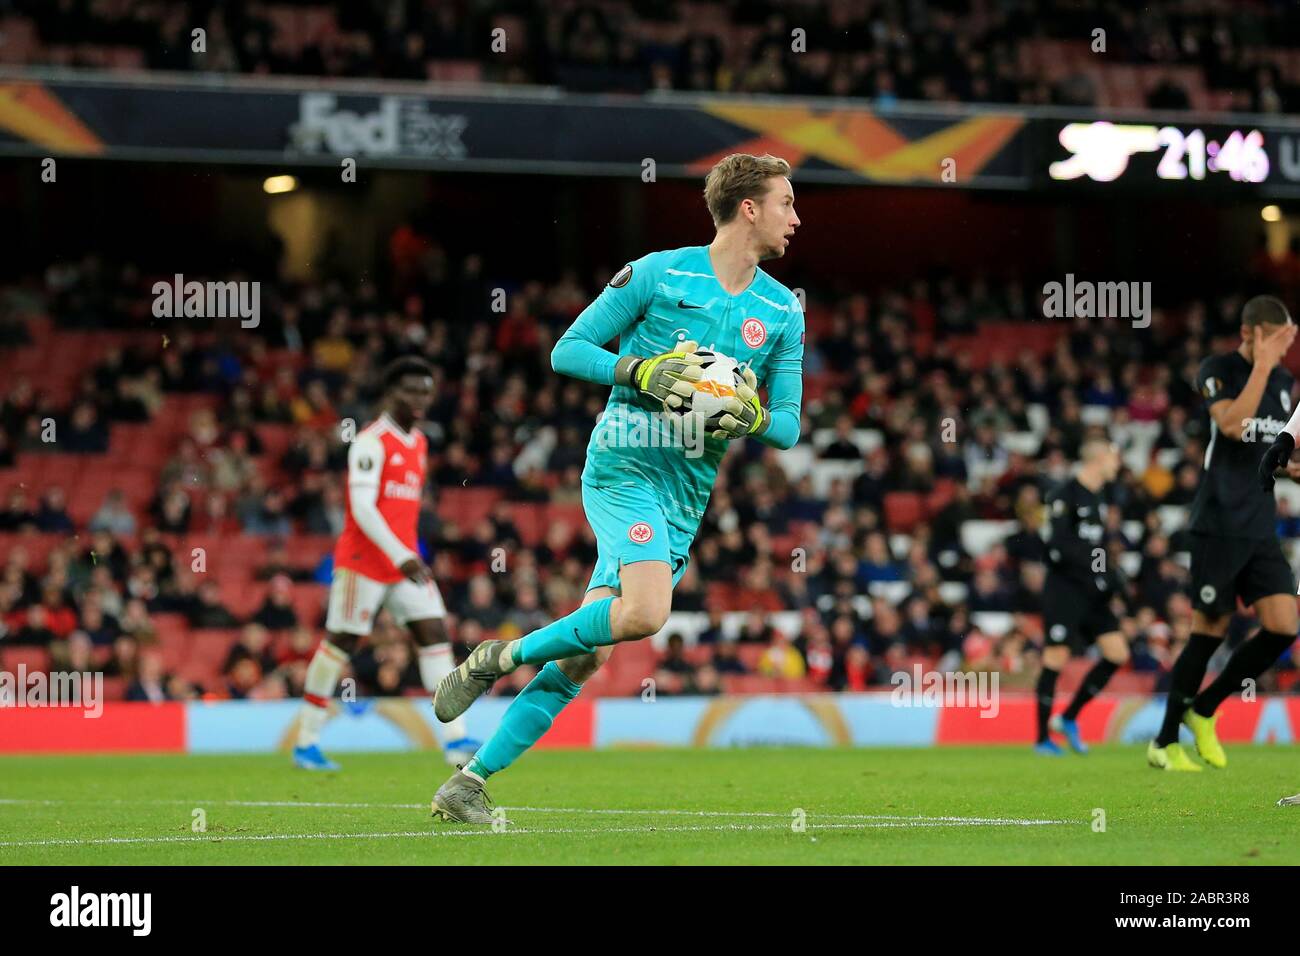 London, UK. 28th November, 2019. Frederik Ronnow of Eintracht Frankfurt during the UEFA Europa League match between Arsenal and Eintracht Frankfurt at the Emirates Stadium, London on Thursday 28th November 2019. (Credit: Leila Coker | MI News) Photograph may only be used for newspaper and/or magazine editorial purposes, license required for commercial use Credit: MI News & Sport /Alamy Live News Stock Photo